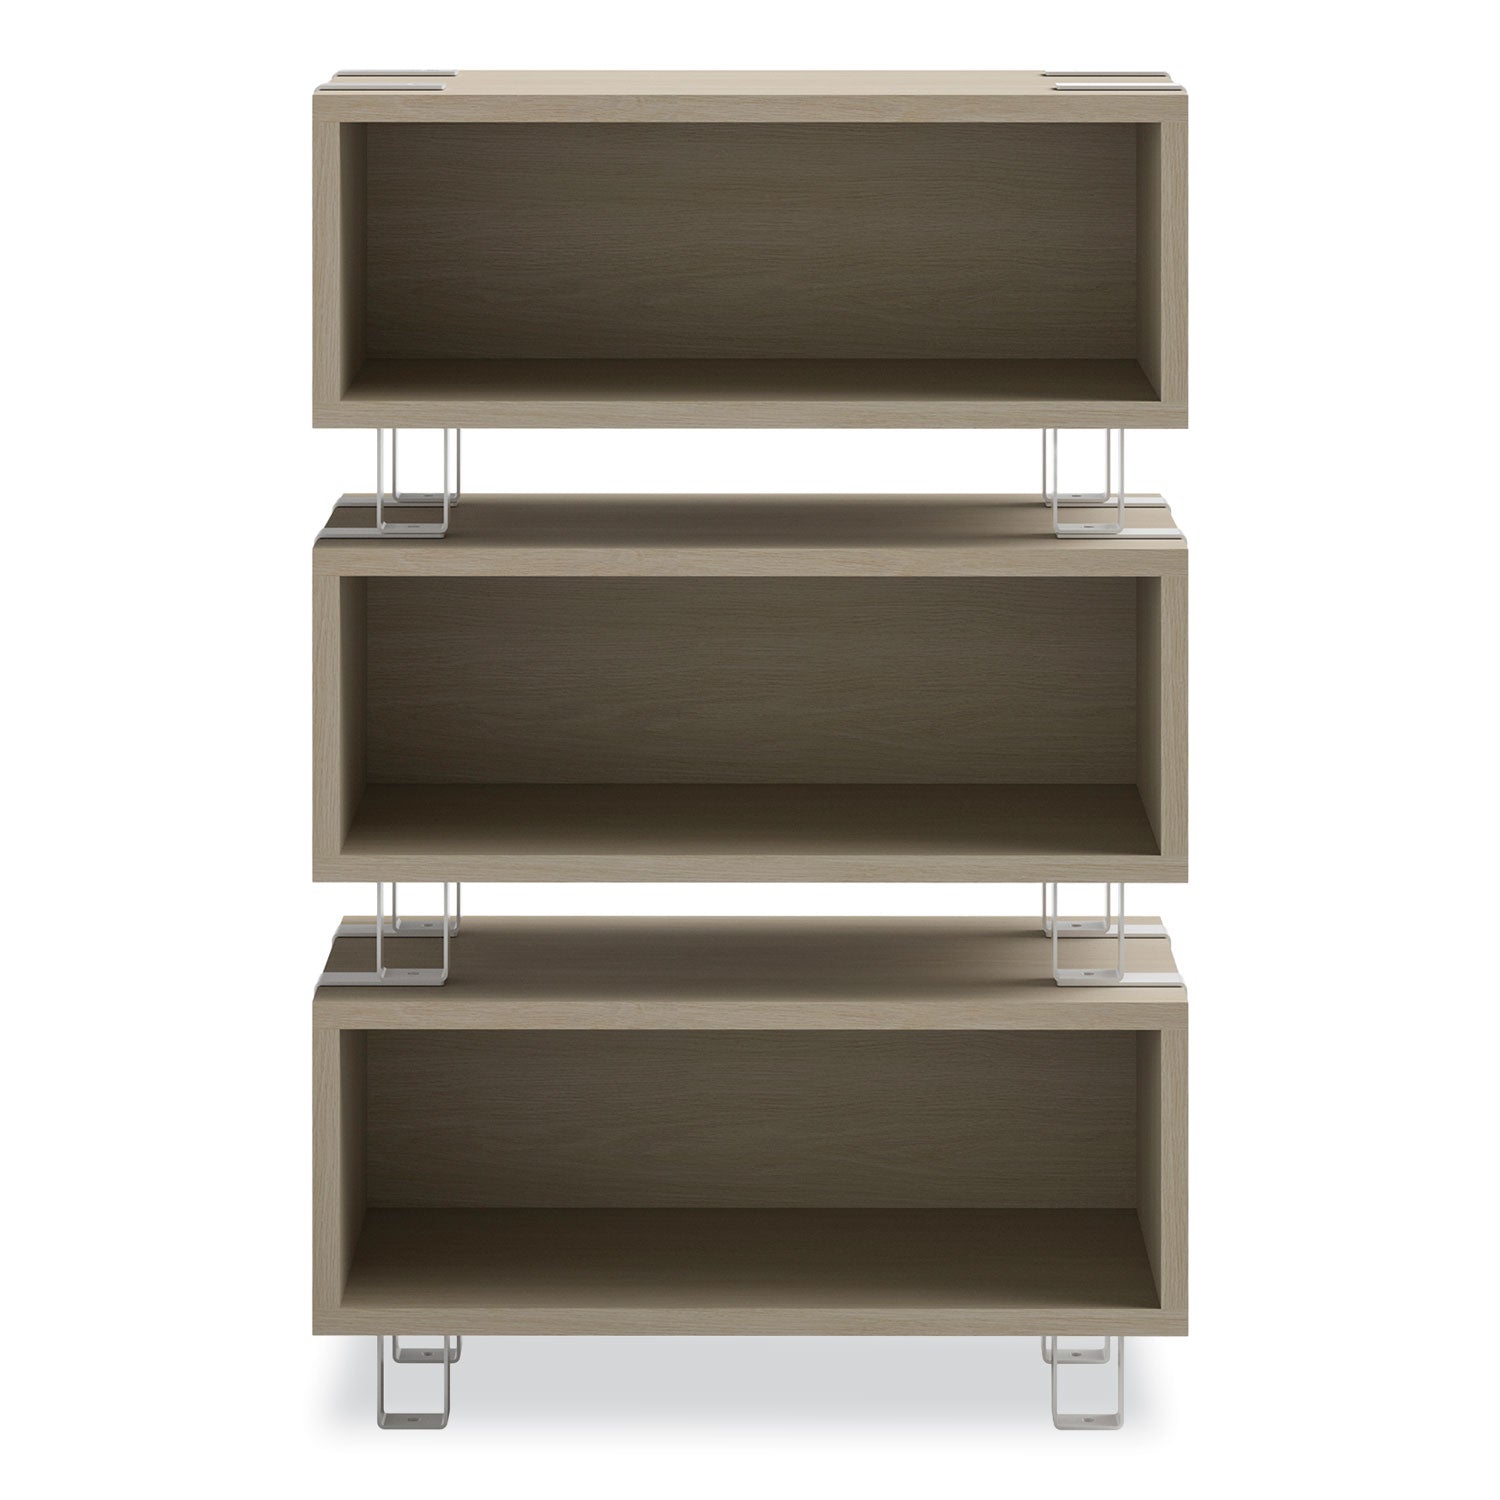 ready-home-office-small-stackable-storage-1-shelf-24w-x-12d-x-1225h-beige-white-ships-in-1-3-business-days_saf5510whna - 8